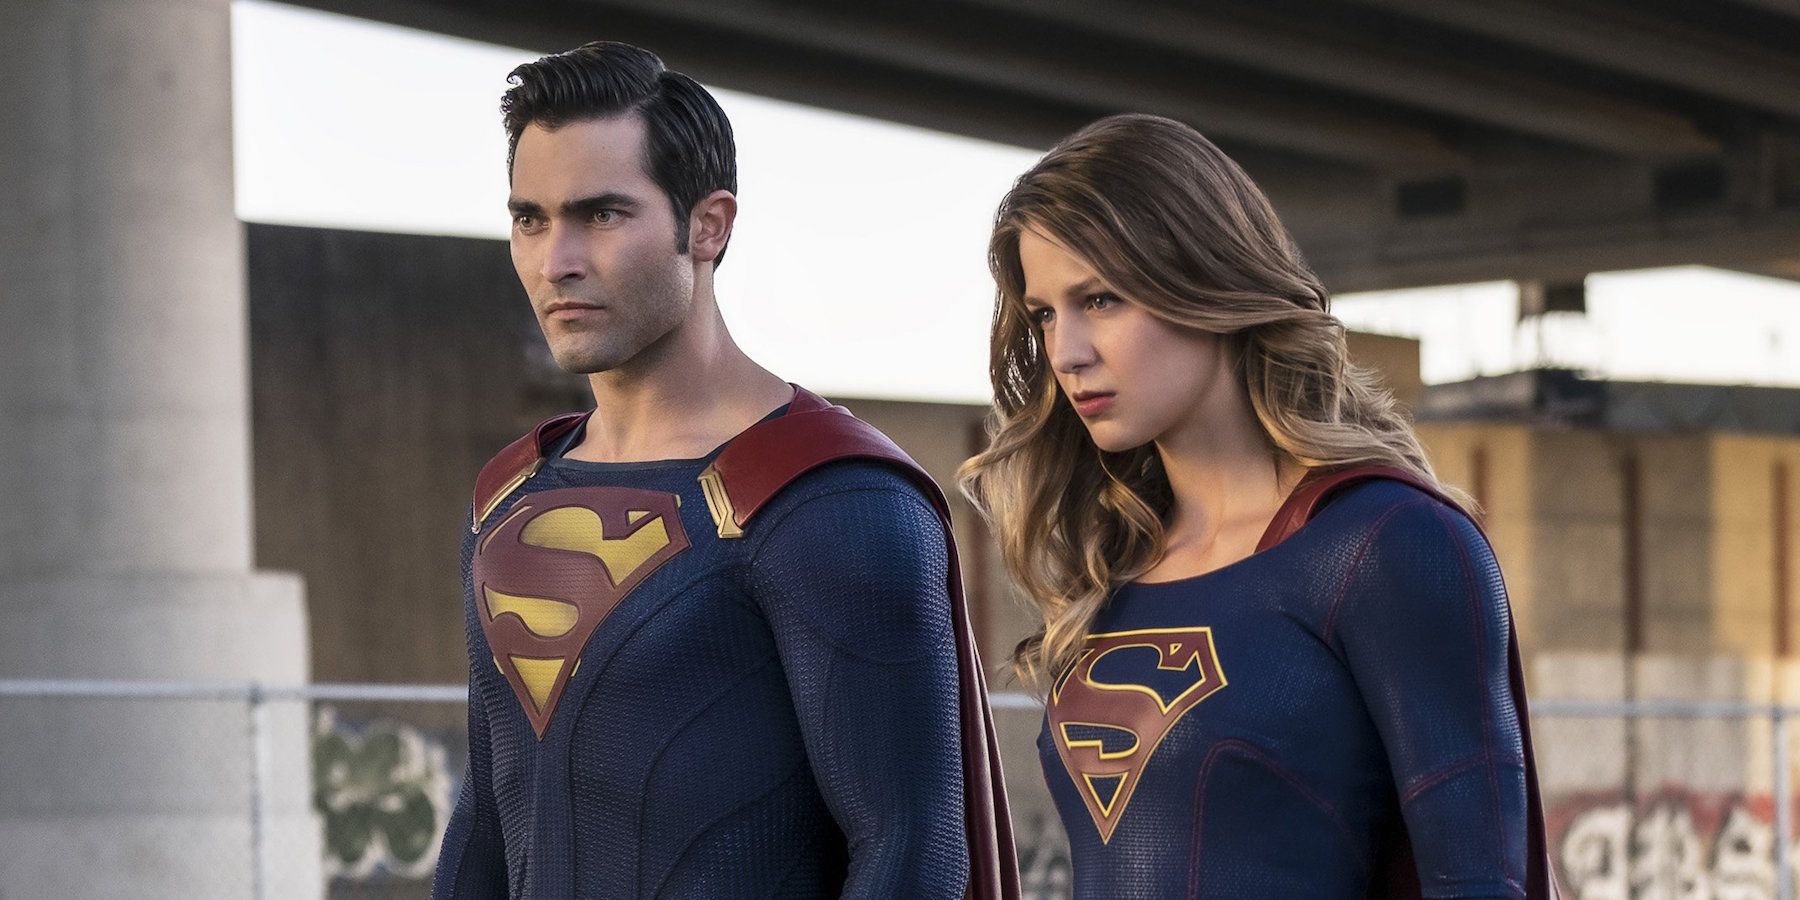 becky loveridge recommends pictures of supergirl and superman pic